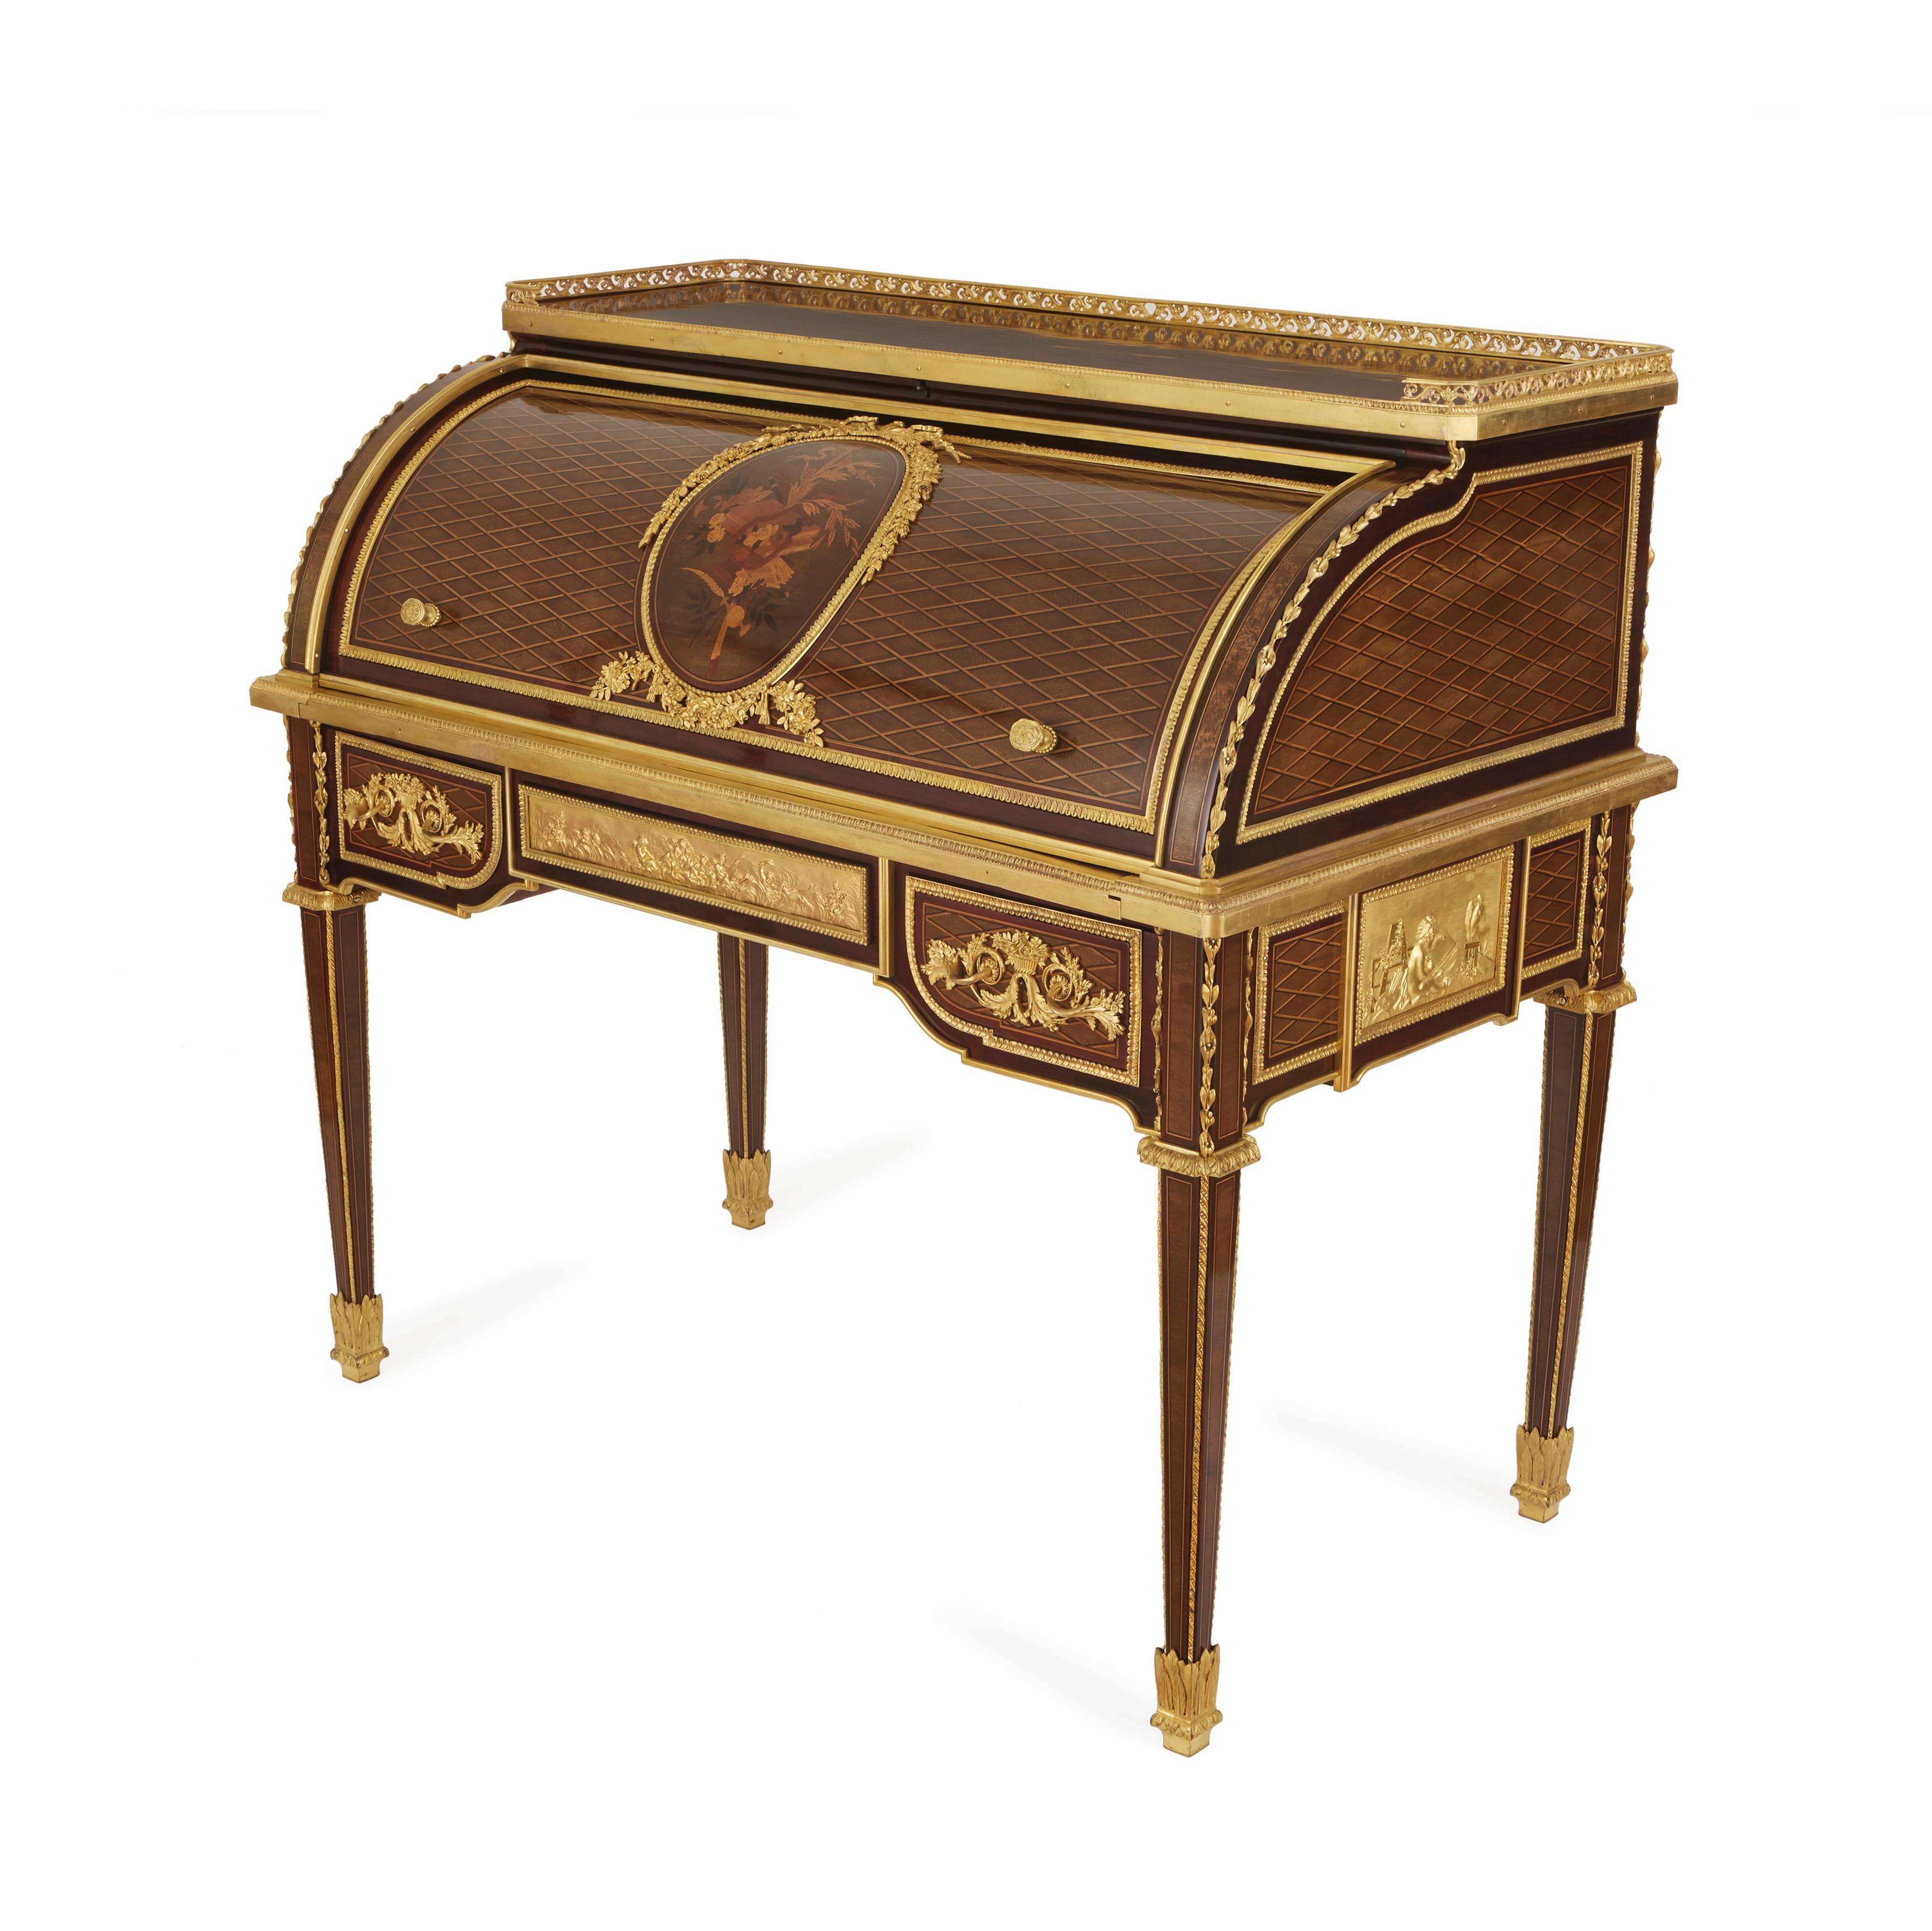 After the model by Jean-Henri Riesener (French, 1734-1806).

Of the Napoleon III period, in the Louis XVI style, with fruitwood and ebony inlaid in bois de citronnier, mahogany and amaranth, with a three-quarter galleried rectangular top above a